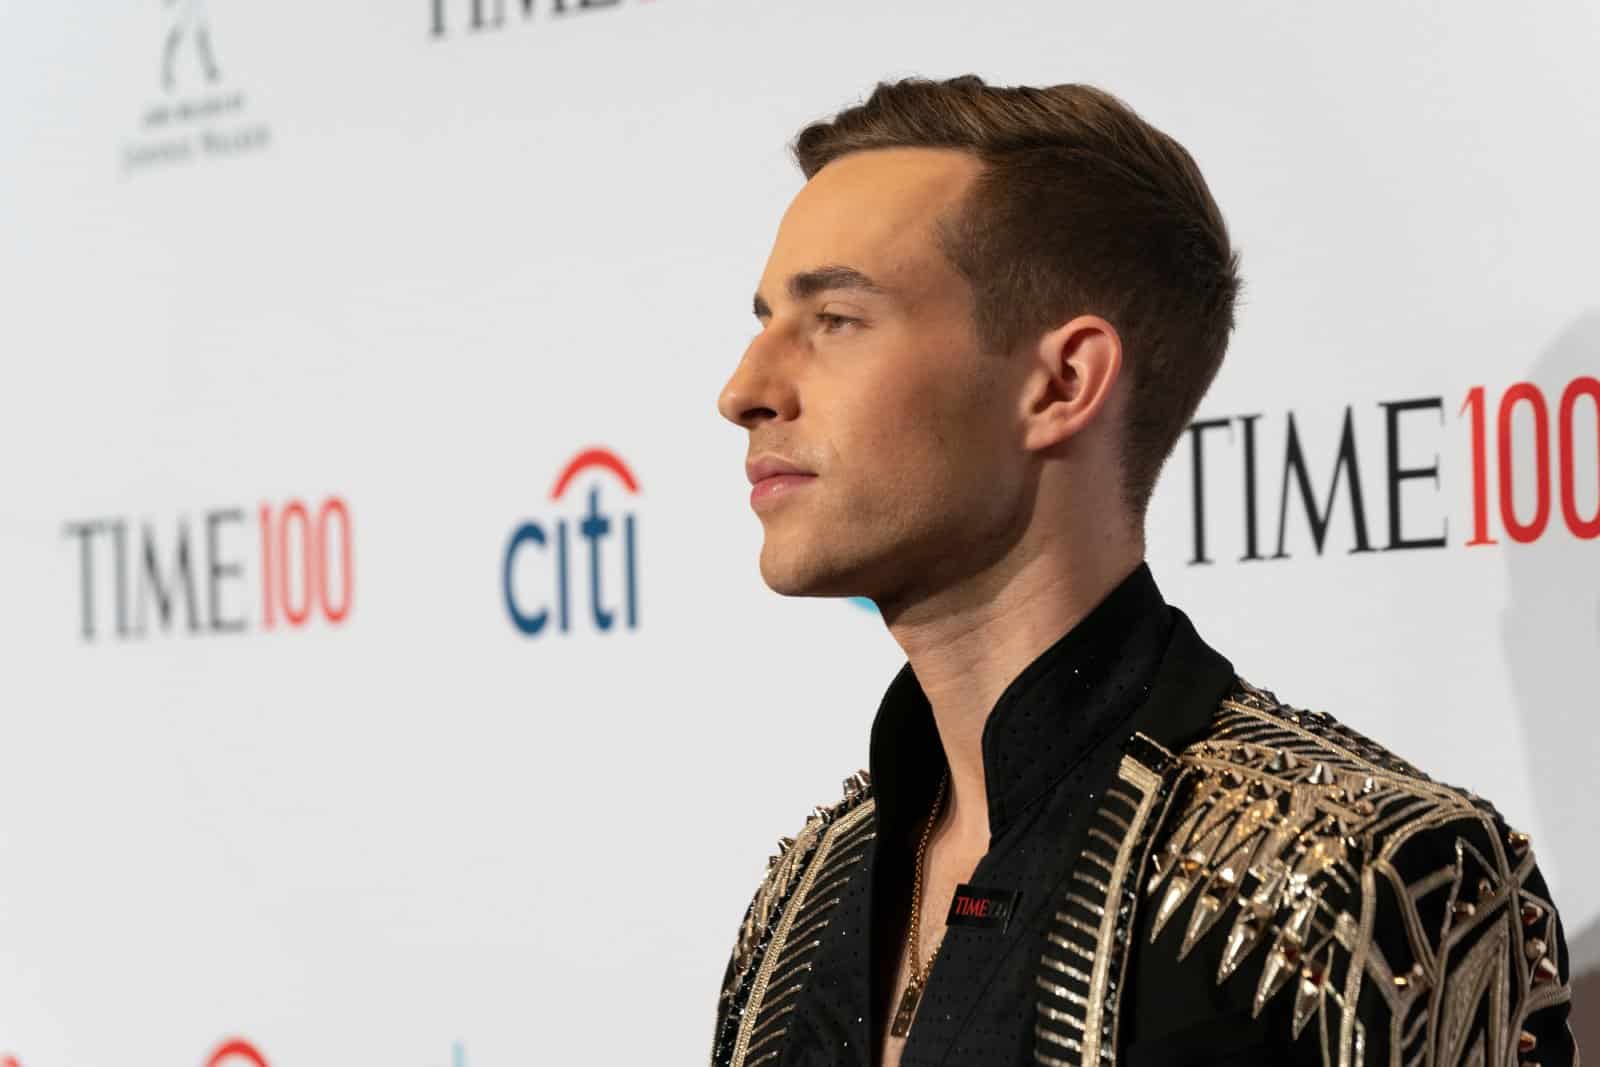 Image Credit: Shutterstock / lev radin <p><span>Olympic figure skater Adam Rippon used his acceptance speech for the Human Rights Campaign Visibility Award in 2018 to discuss his experiences as an openly gay athlete and the significance of representation in sports.</span></p>